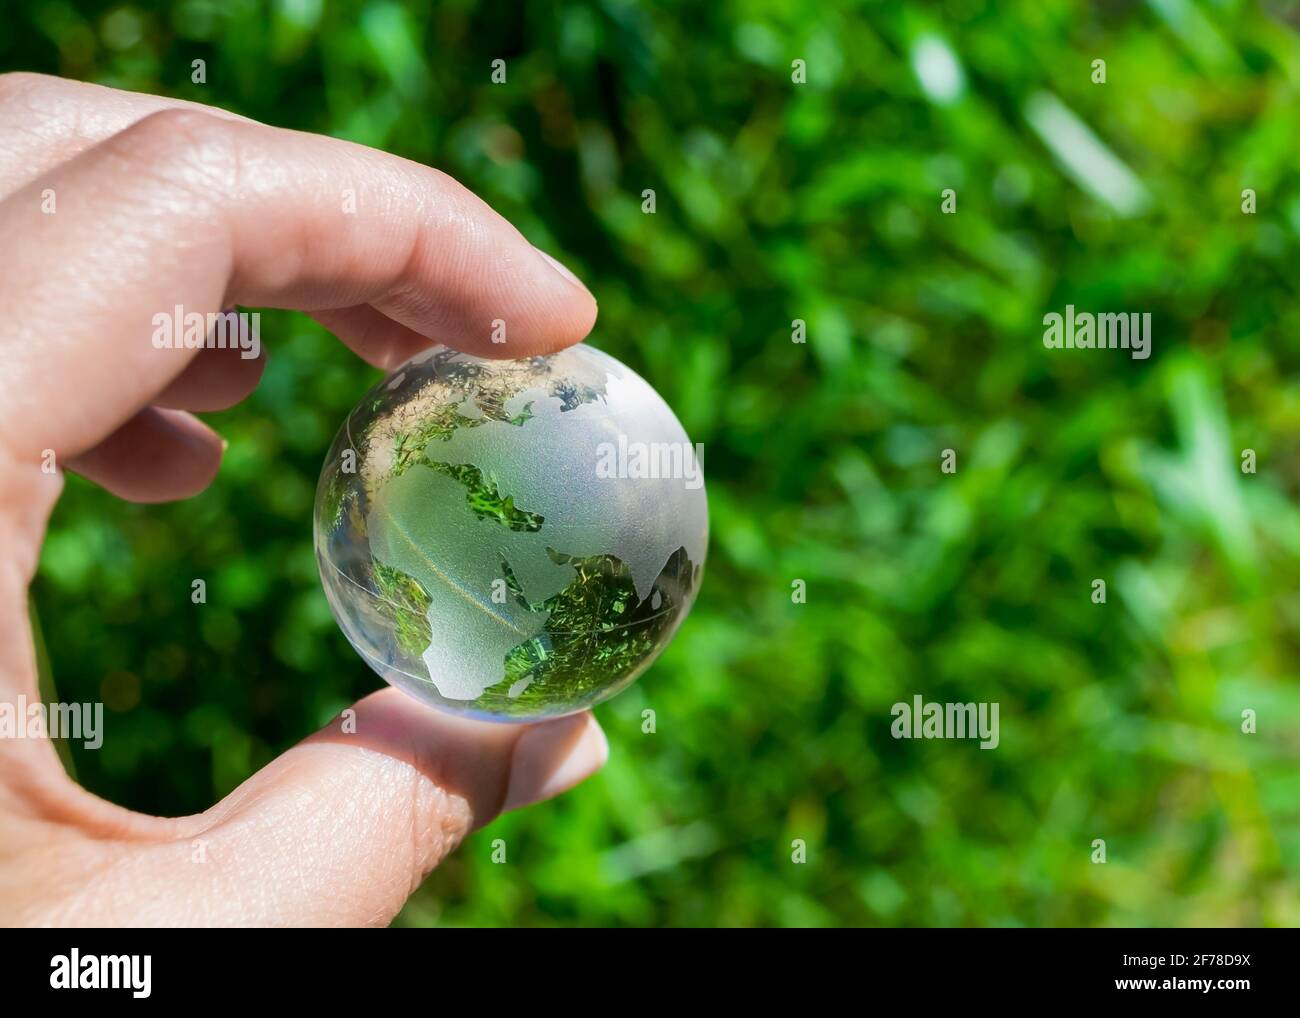 Crystal globe in the hand of a man against a background of green foliage. Earth protection concept. Earth Day Stock Photo